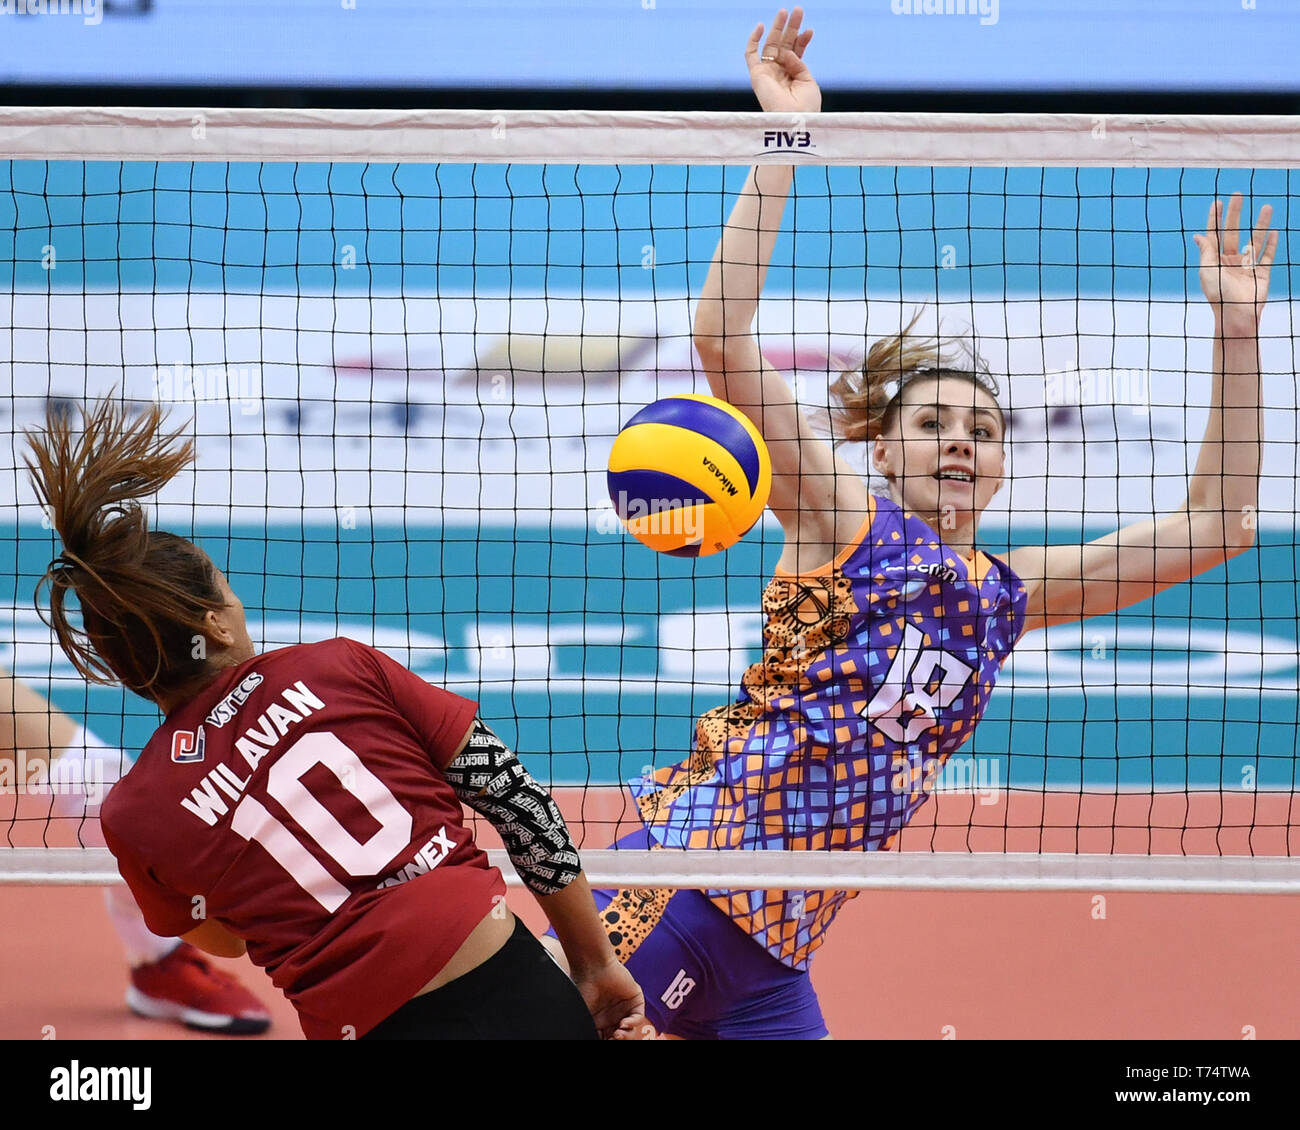 Tianjin. 4th May, 2019. Kristina Anikonova (R) of Altay VC competes during the semifinal match between Supreme Chonburi of Thailand and Altay VC of Kazakhstan at the 2019 Asian Women's Club Volleyball Championship in north China's Tianjin Municipality on May 4, 2019. Supreme Chonburi won 3-0. Credit: Li Ran/Xinhua/Alamy Live News Stock Photo